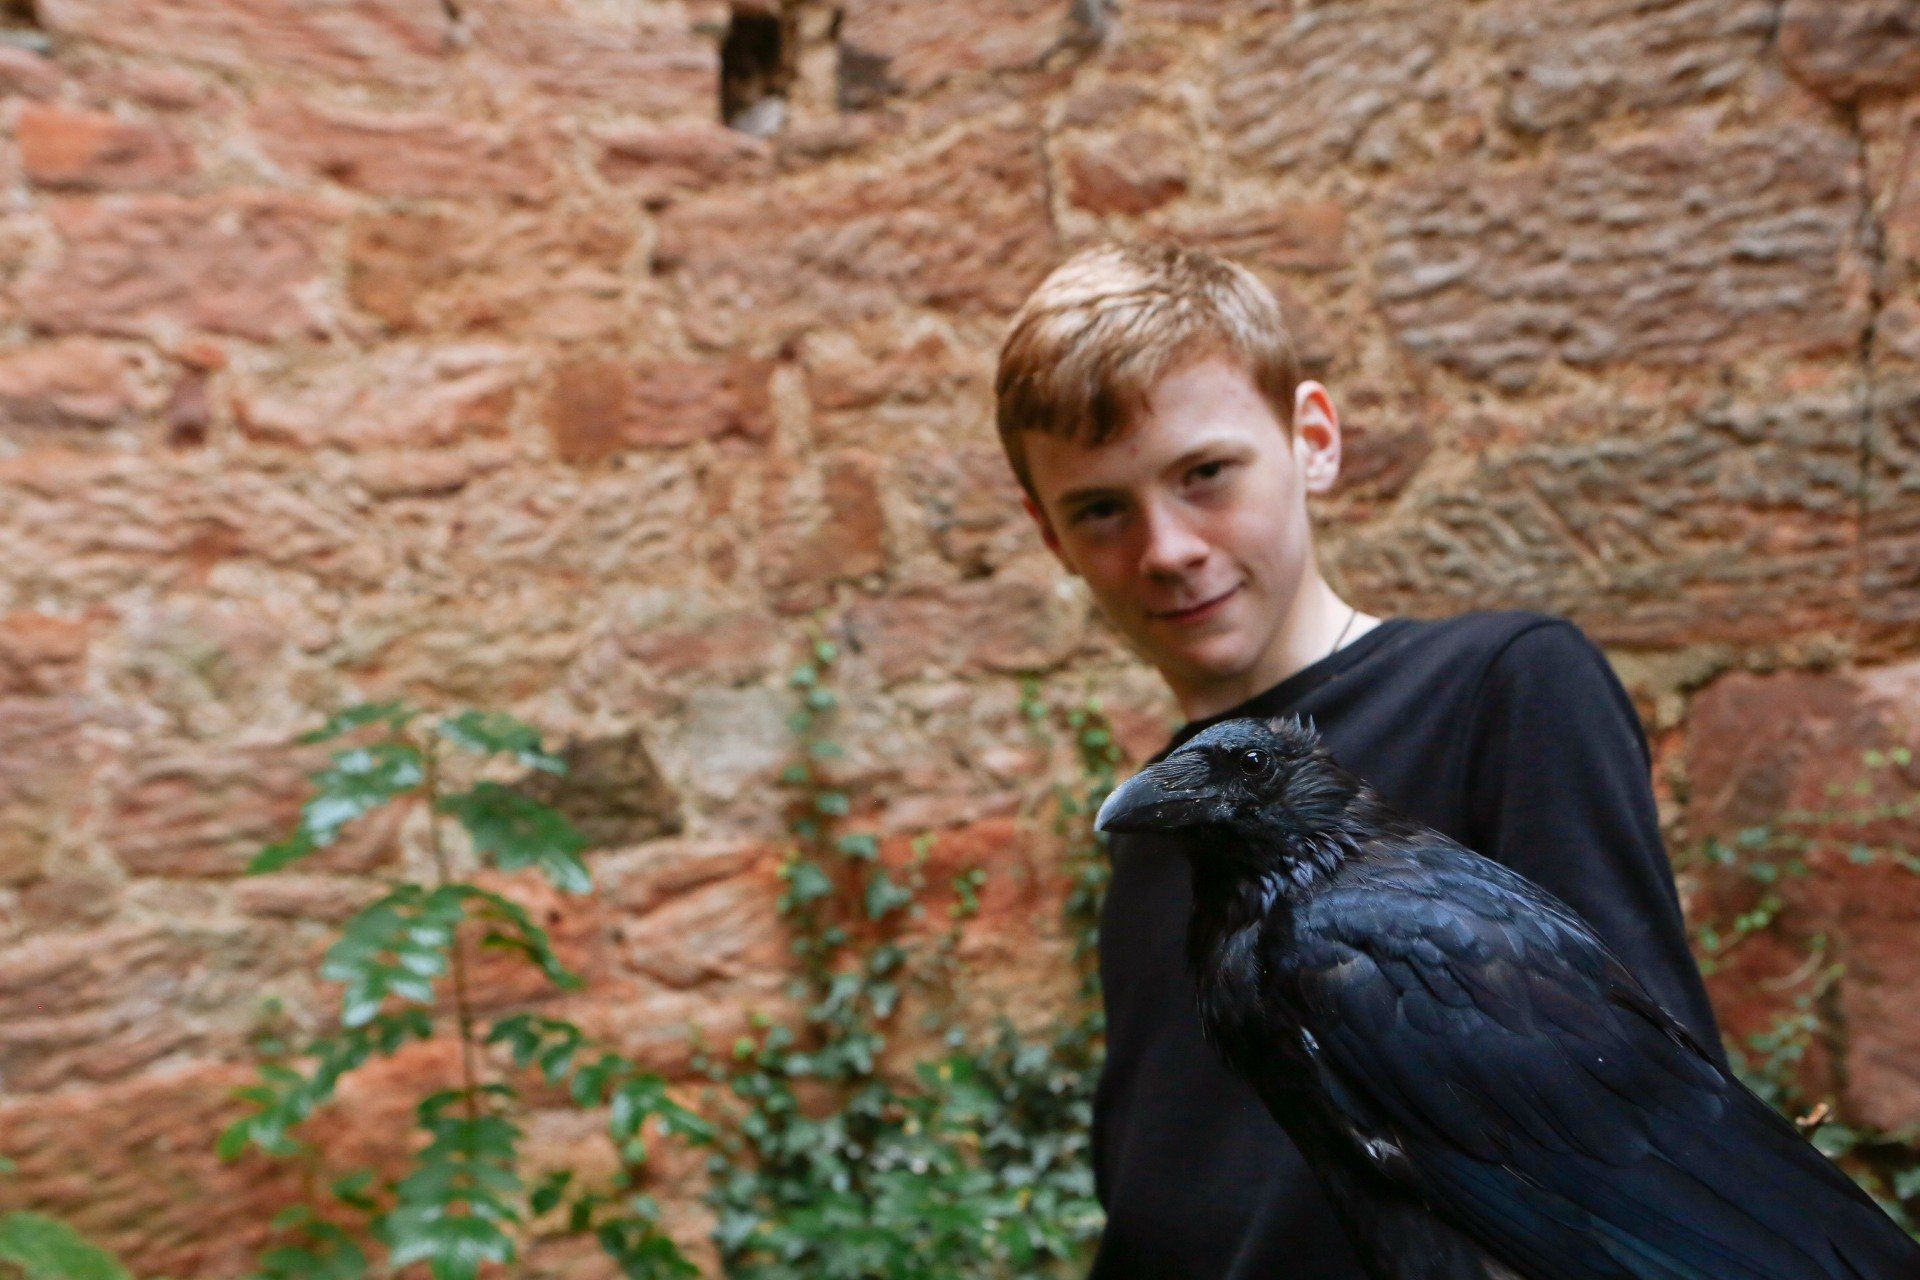 a young boy is holding a black bird in his arms .